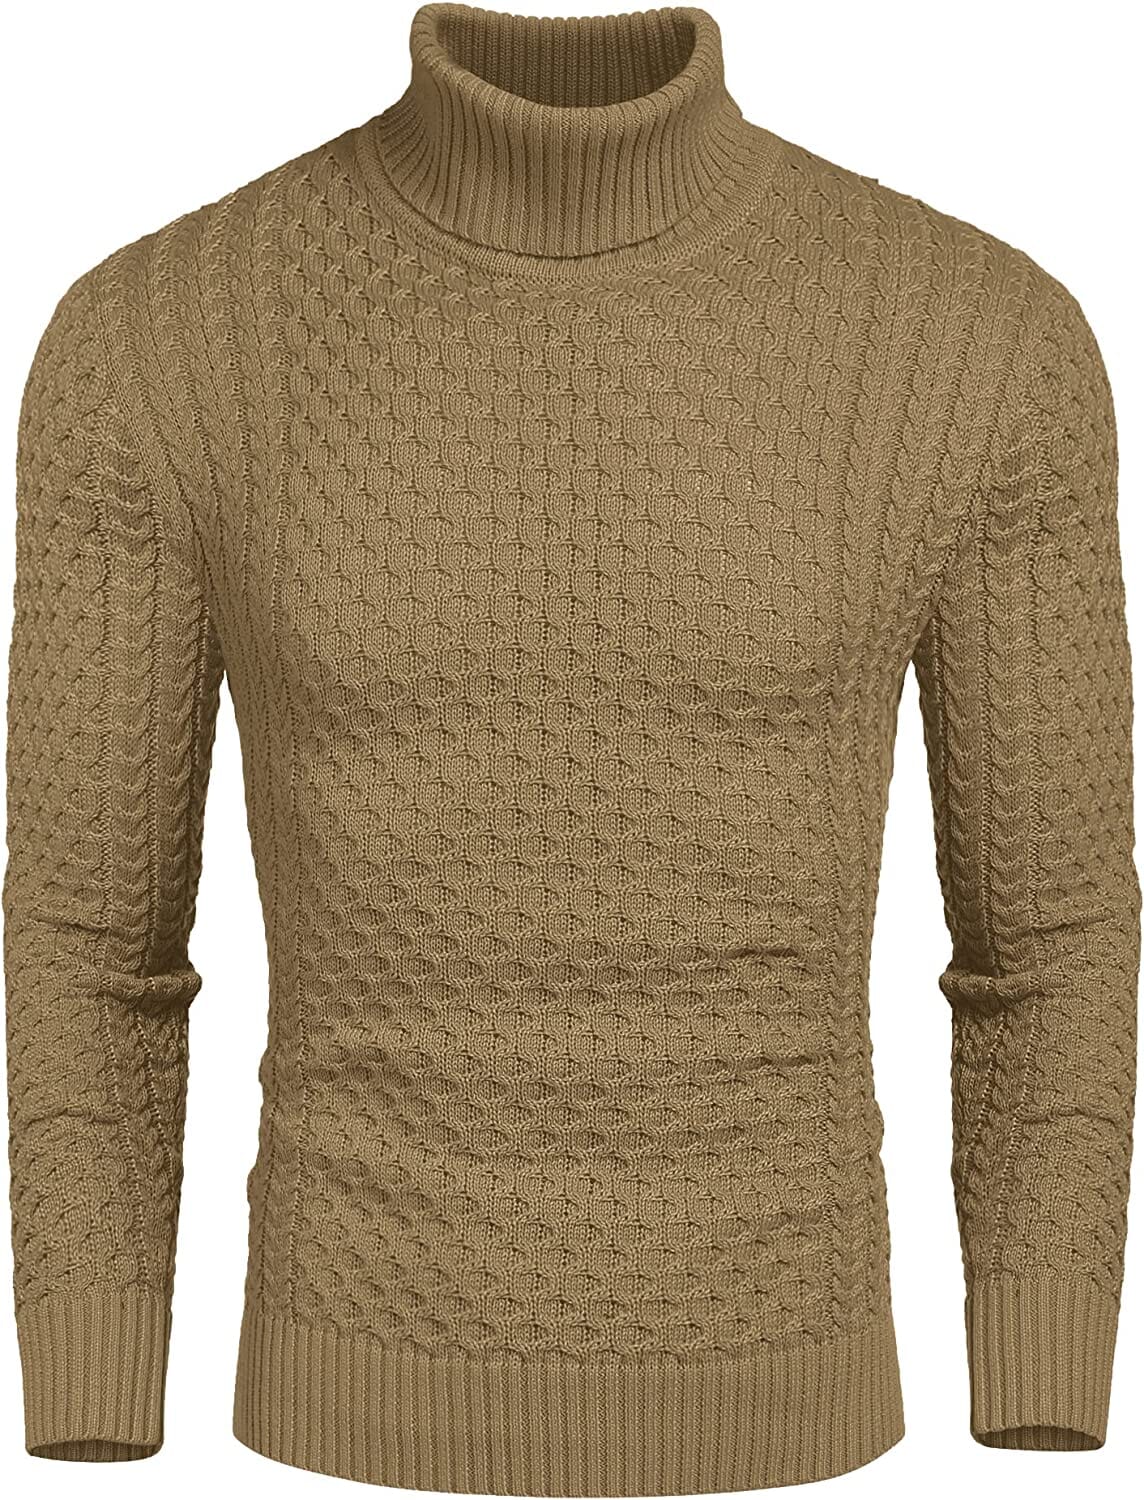 Slim Fit Turtleneck Knitted Twisted Pullover Sweaters (US Only) Sweaters Coofandy's Light Khaki S 